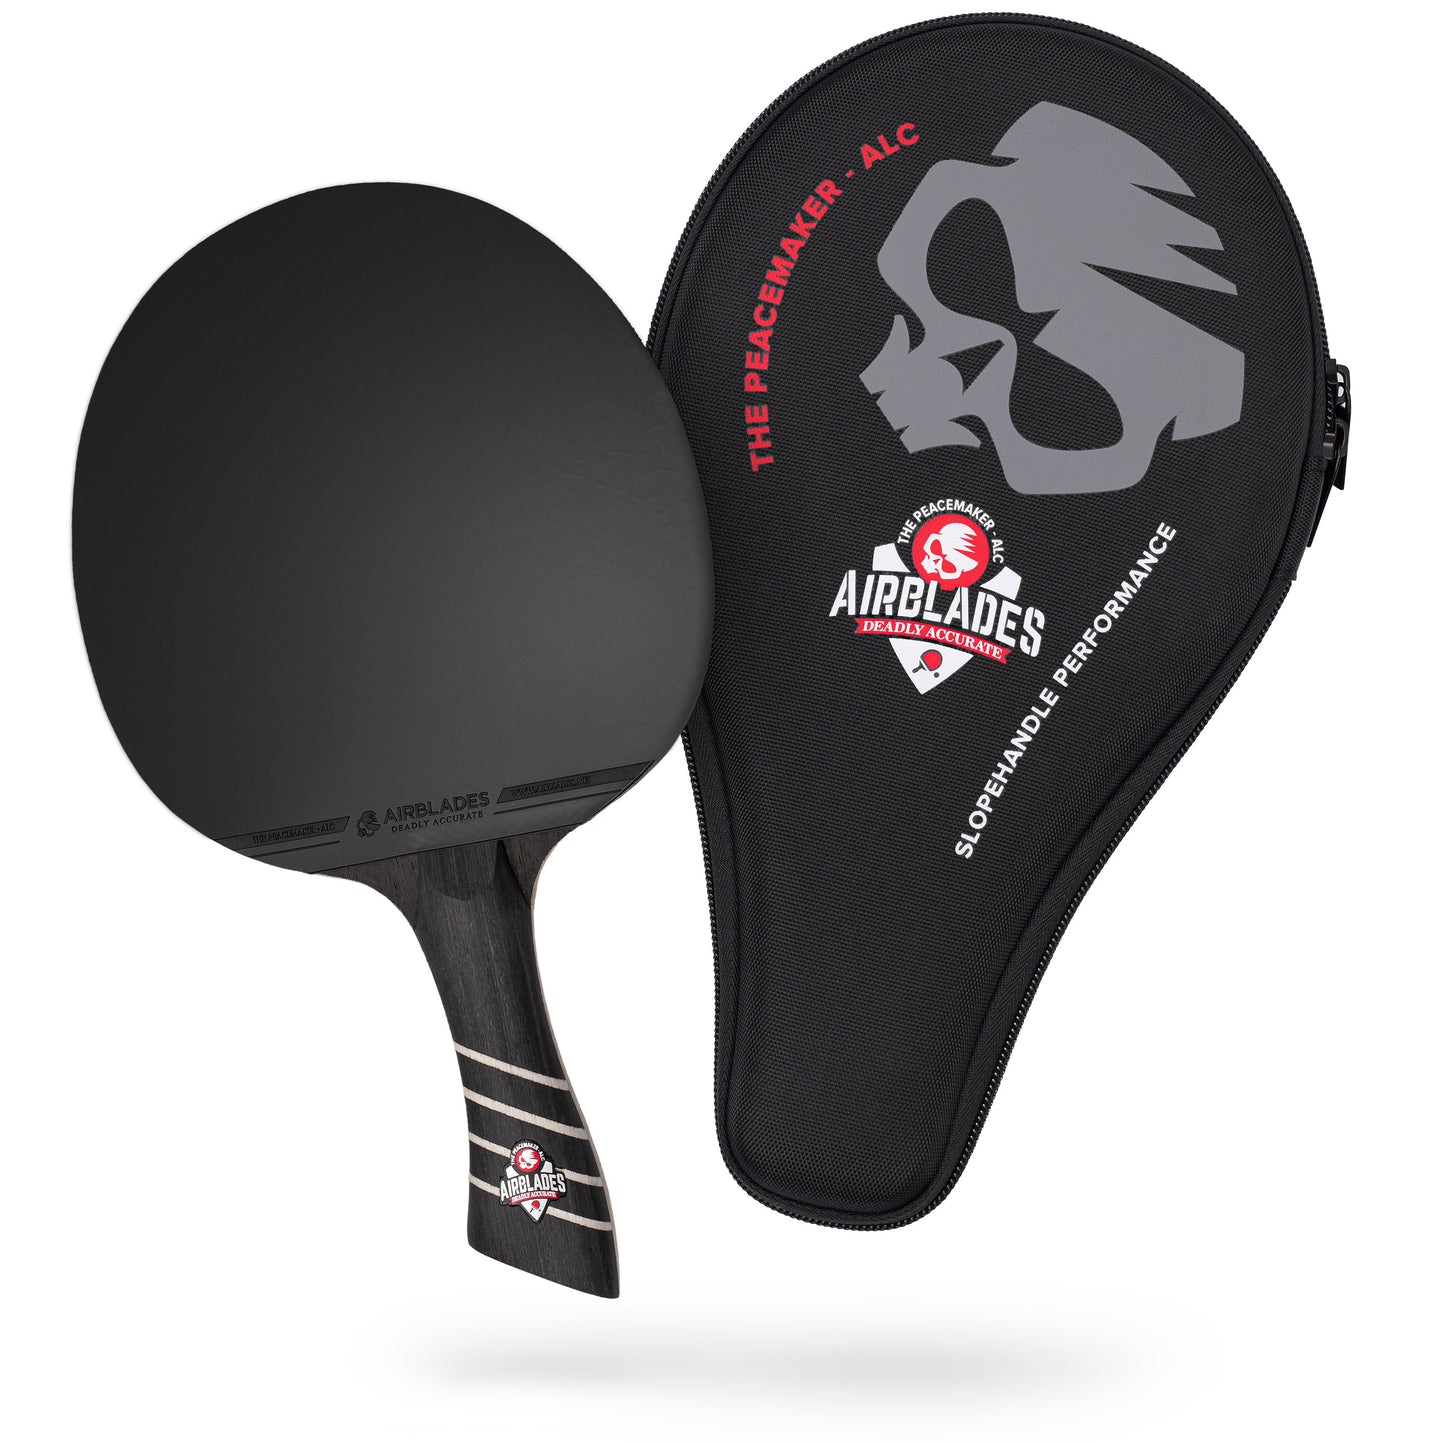 AirBlades pint pong paddle with a patented slopehandle design for ultimate table tennis performance